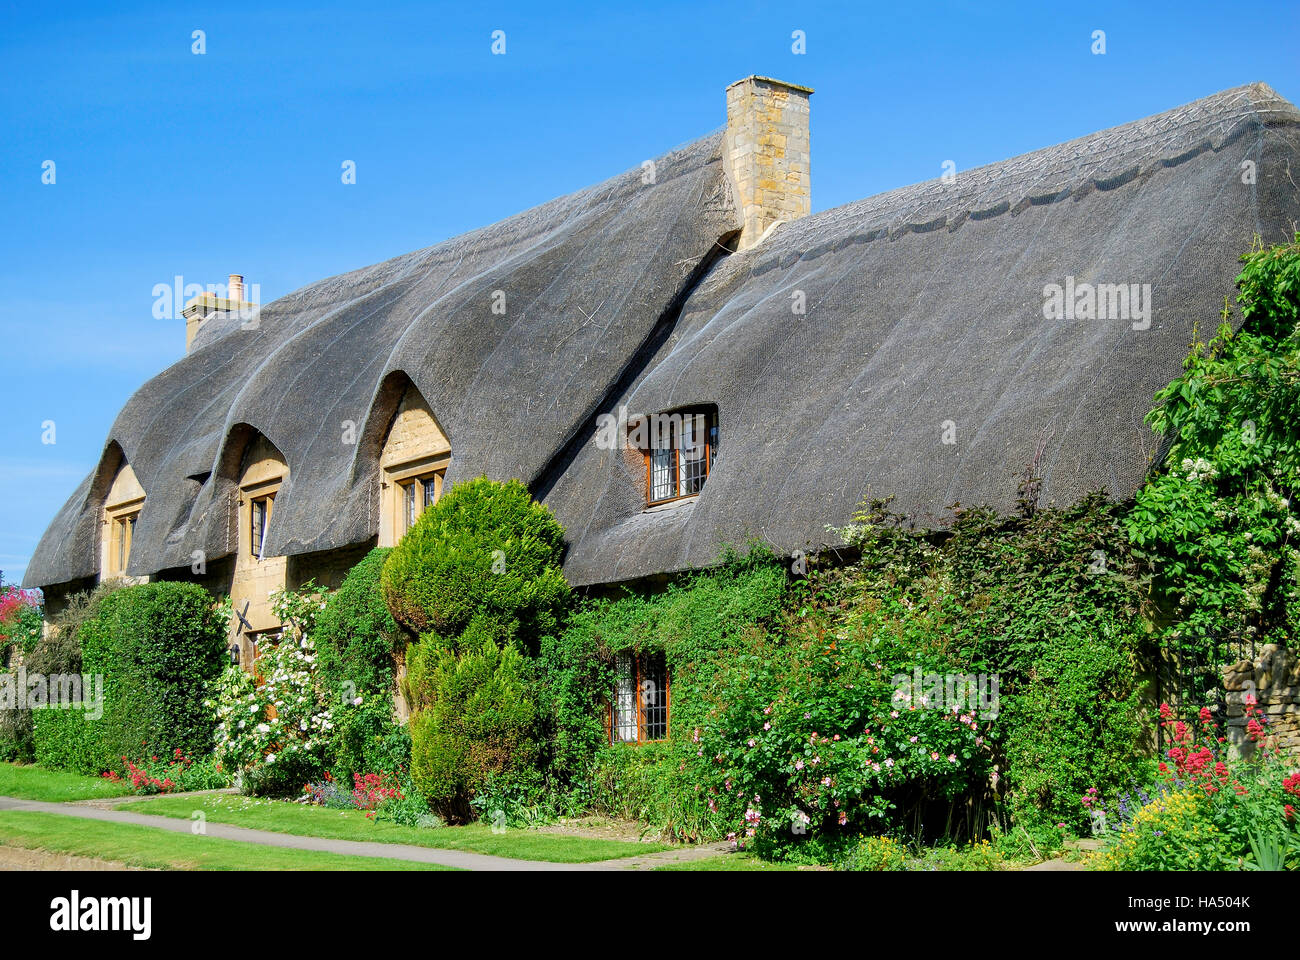 Chaumières, Chipping Campden, Cotswolds, Gloucestershire, Angleterre, Royaume-Uni Banque D'Images